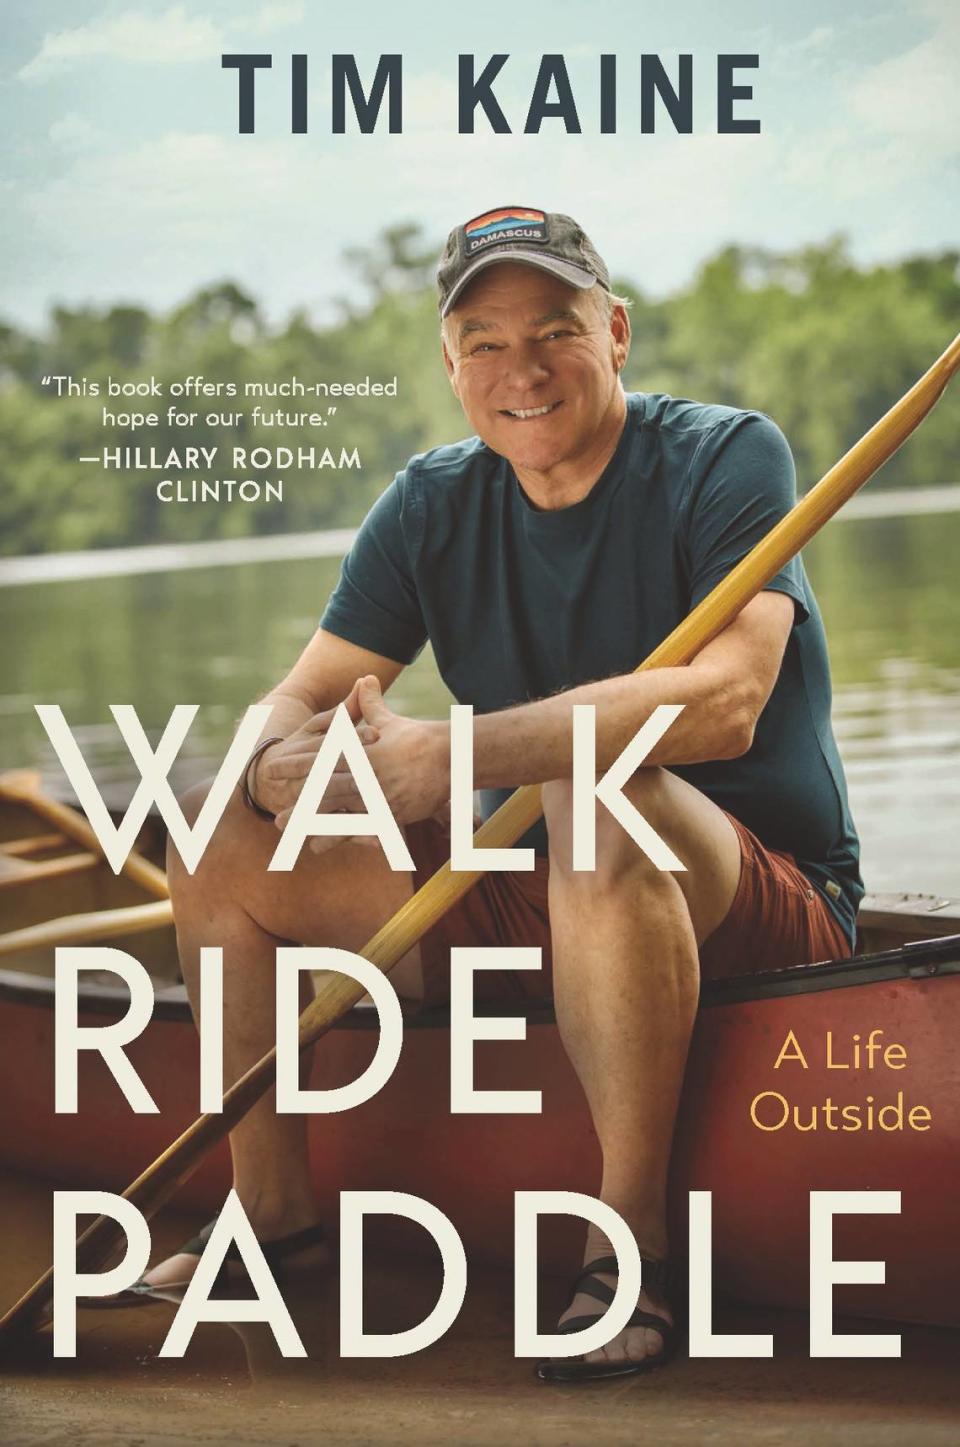 “Walk, Ride, Paddle: A Life Outside” is Tim Kaine’s “love letter to Virginia,” but he says he remains a “Kansas City kid.”